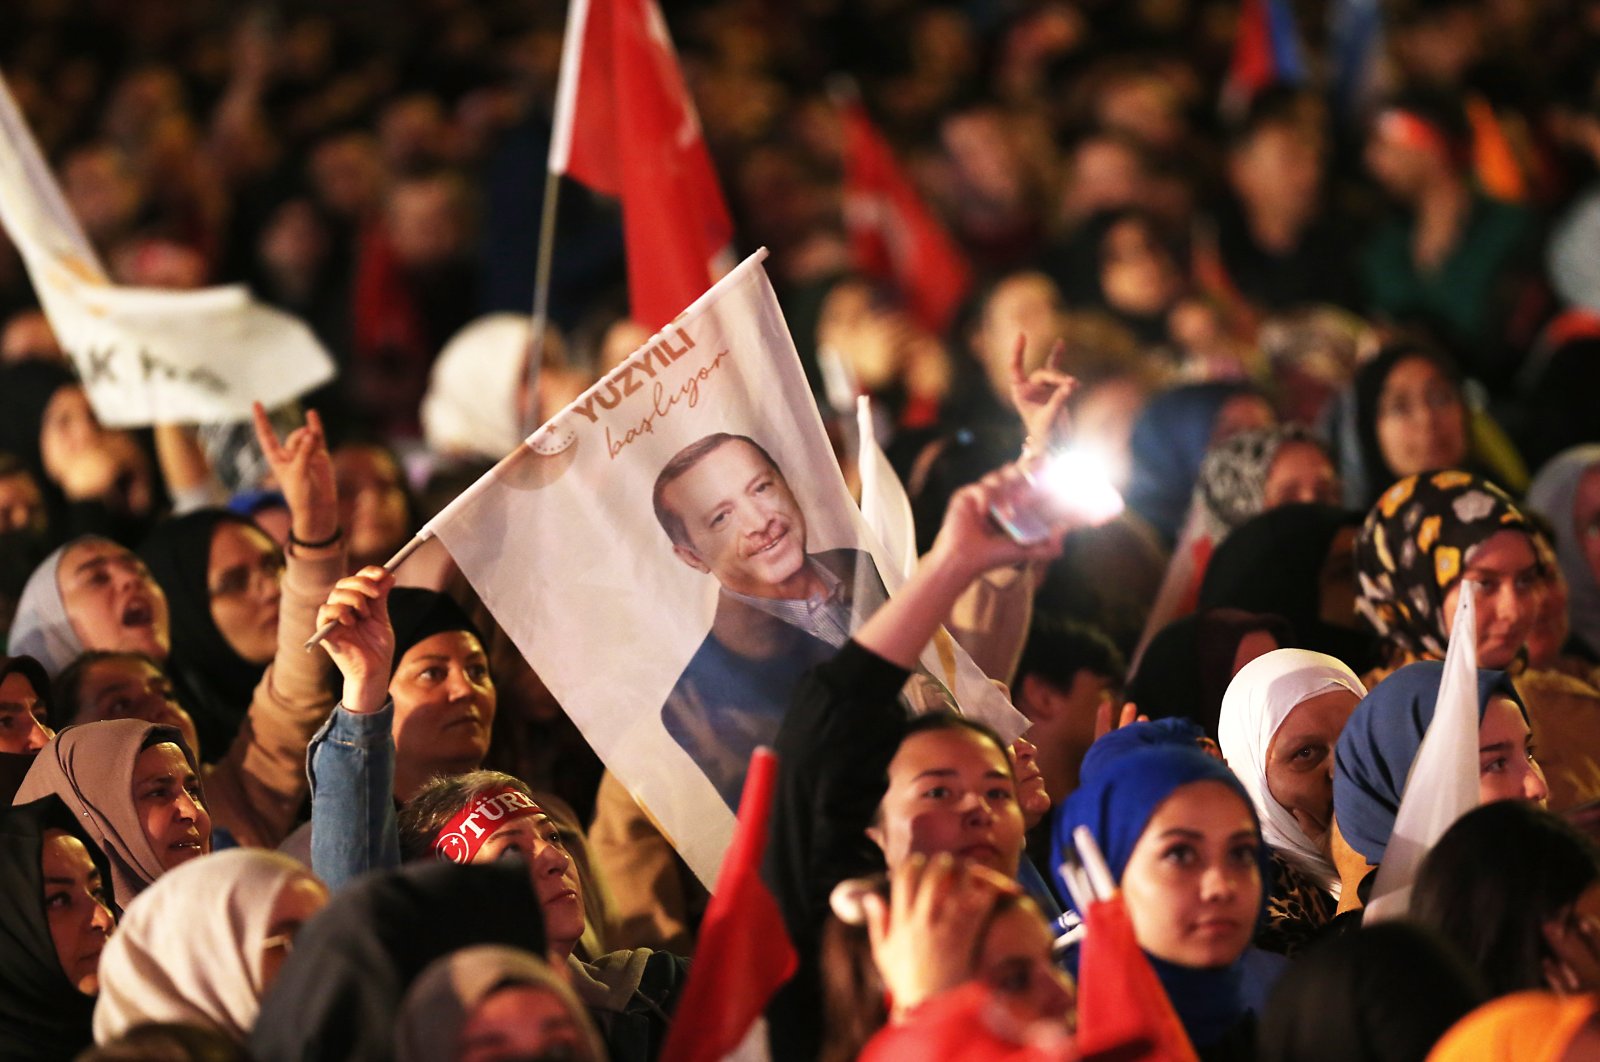 Supporters wave flags and banners as President Recep Tayyip Erdoğan as he makes an address at the Justice and Development Party (AK Party) headquarters, in Ankara, Türkiye, May 15, 2023. (EPA Photo)